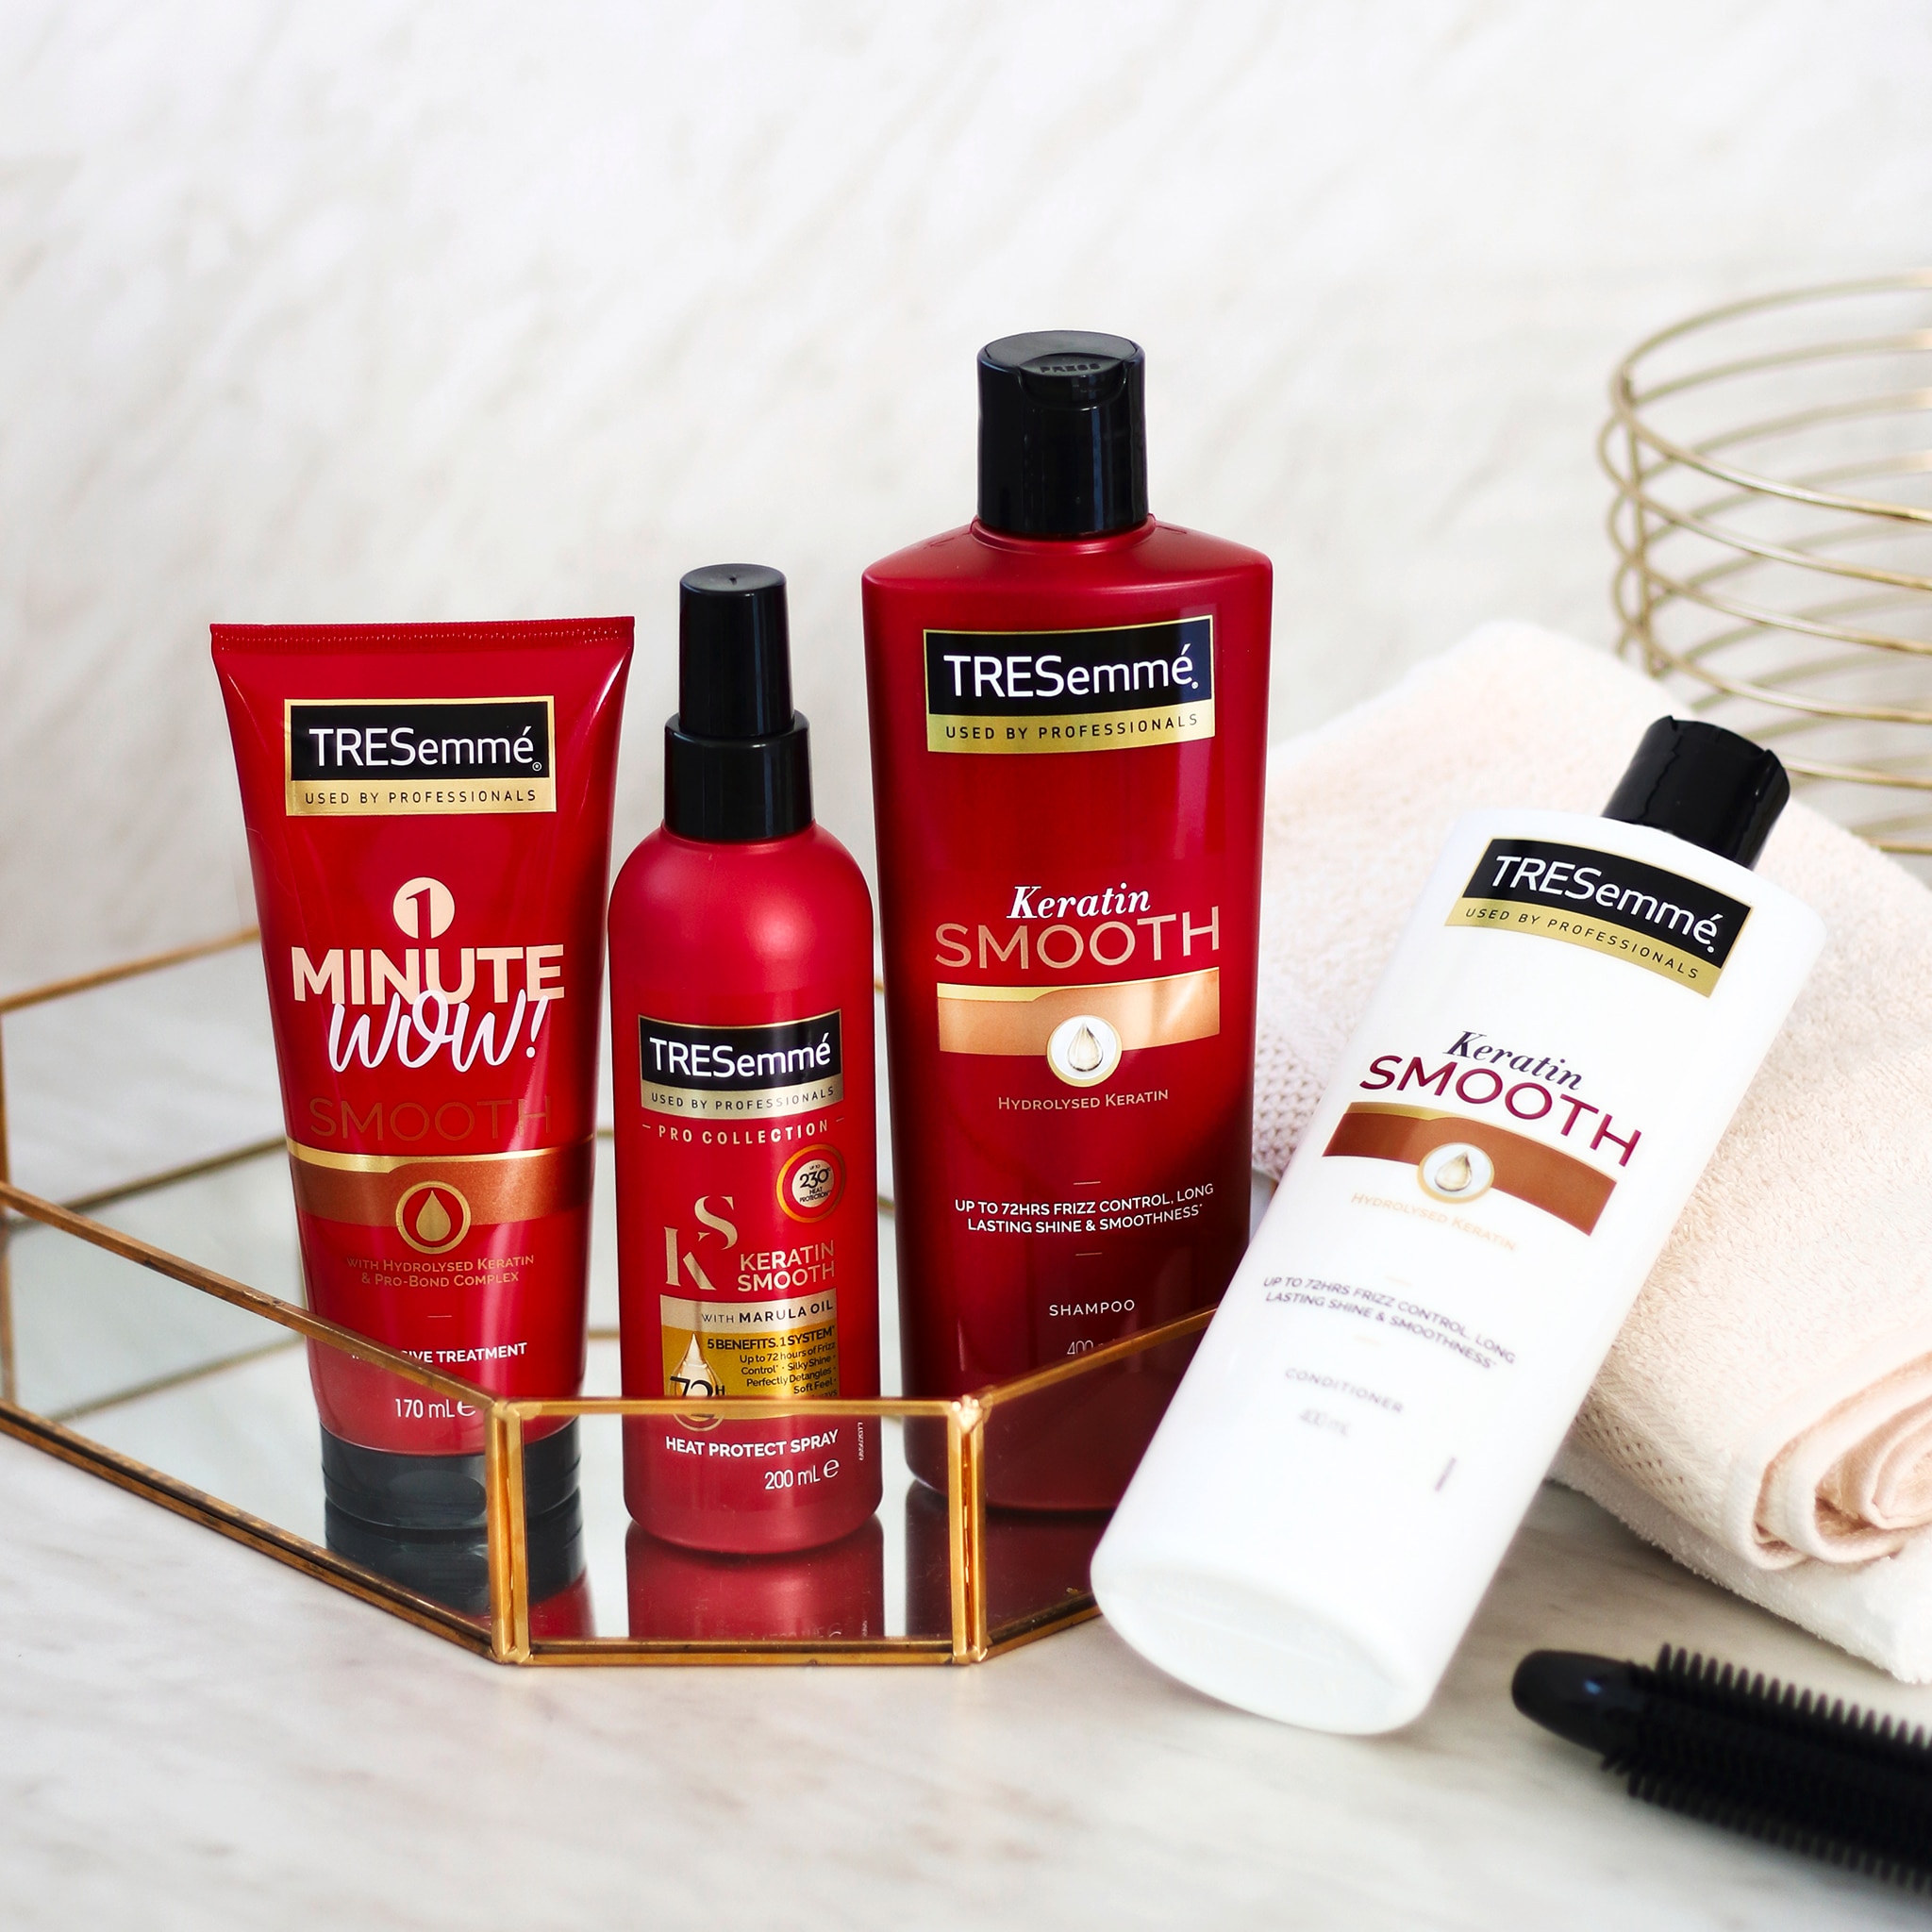 TRESemme's New Pro Pure Collection